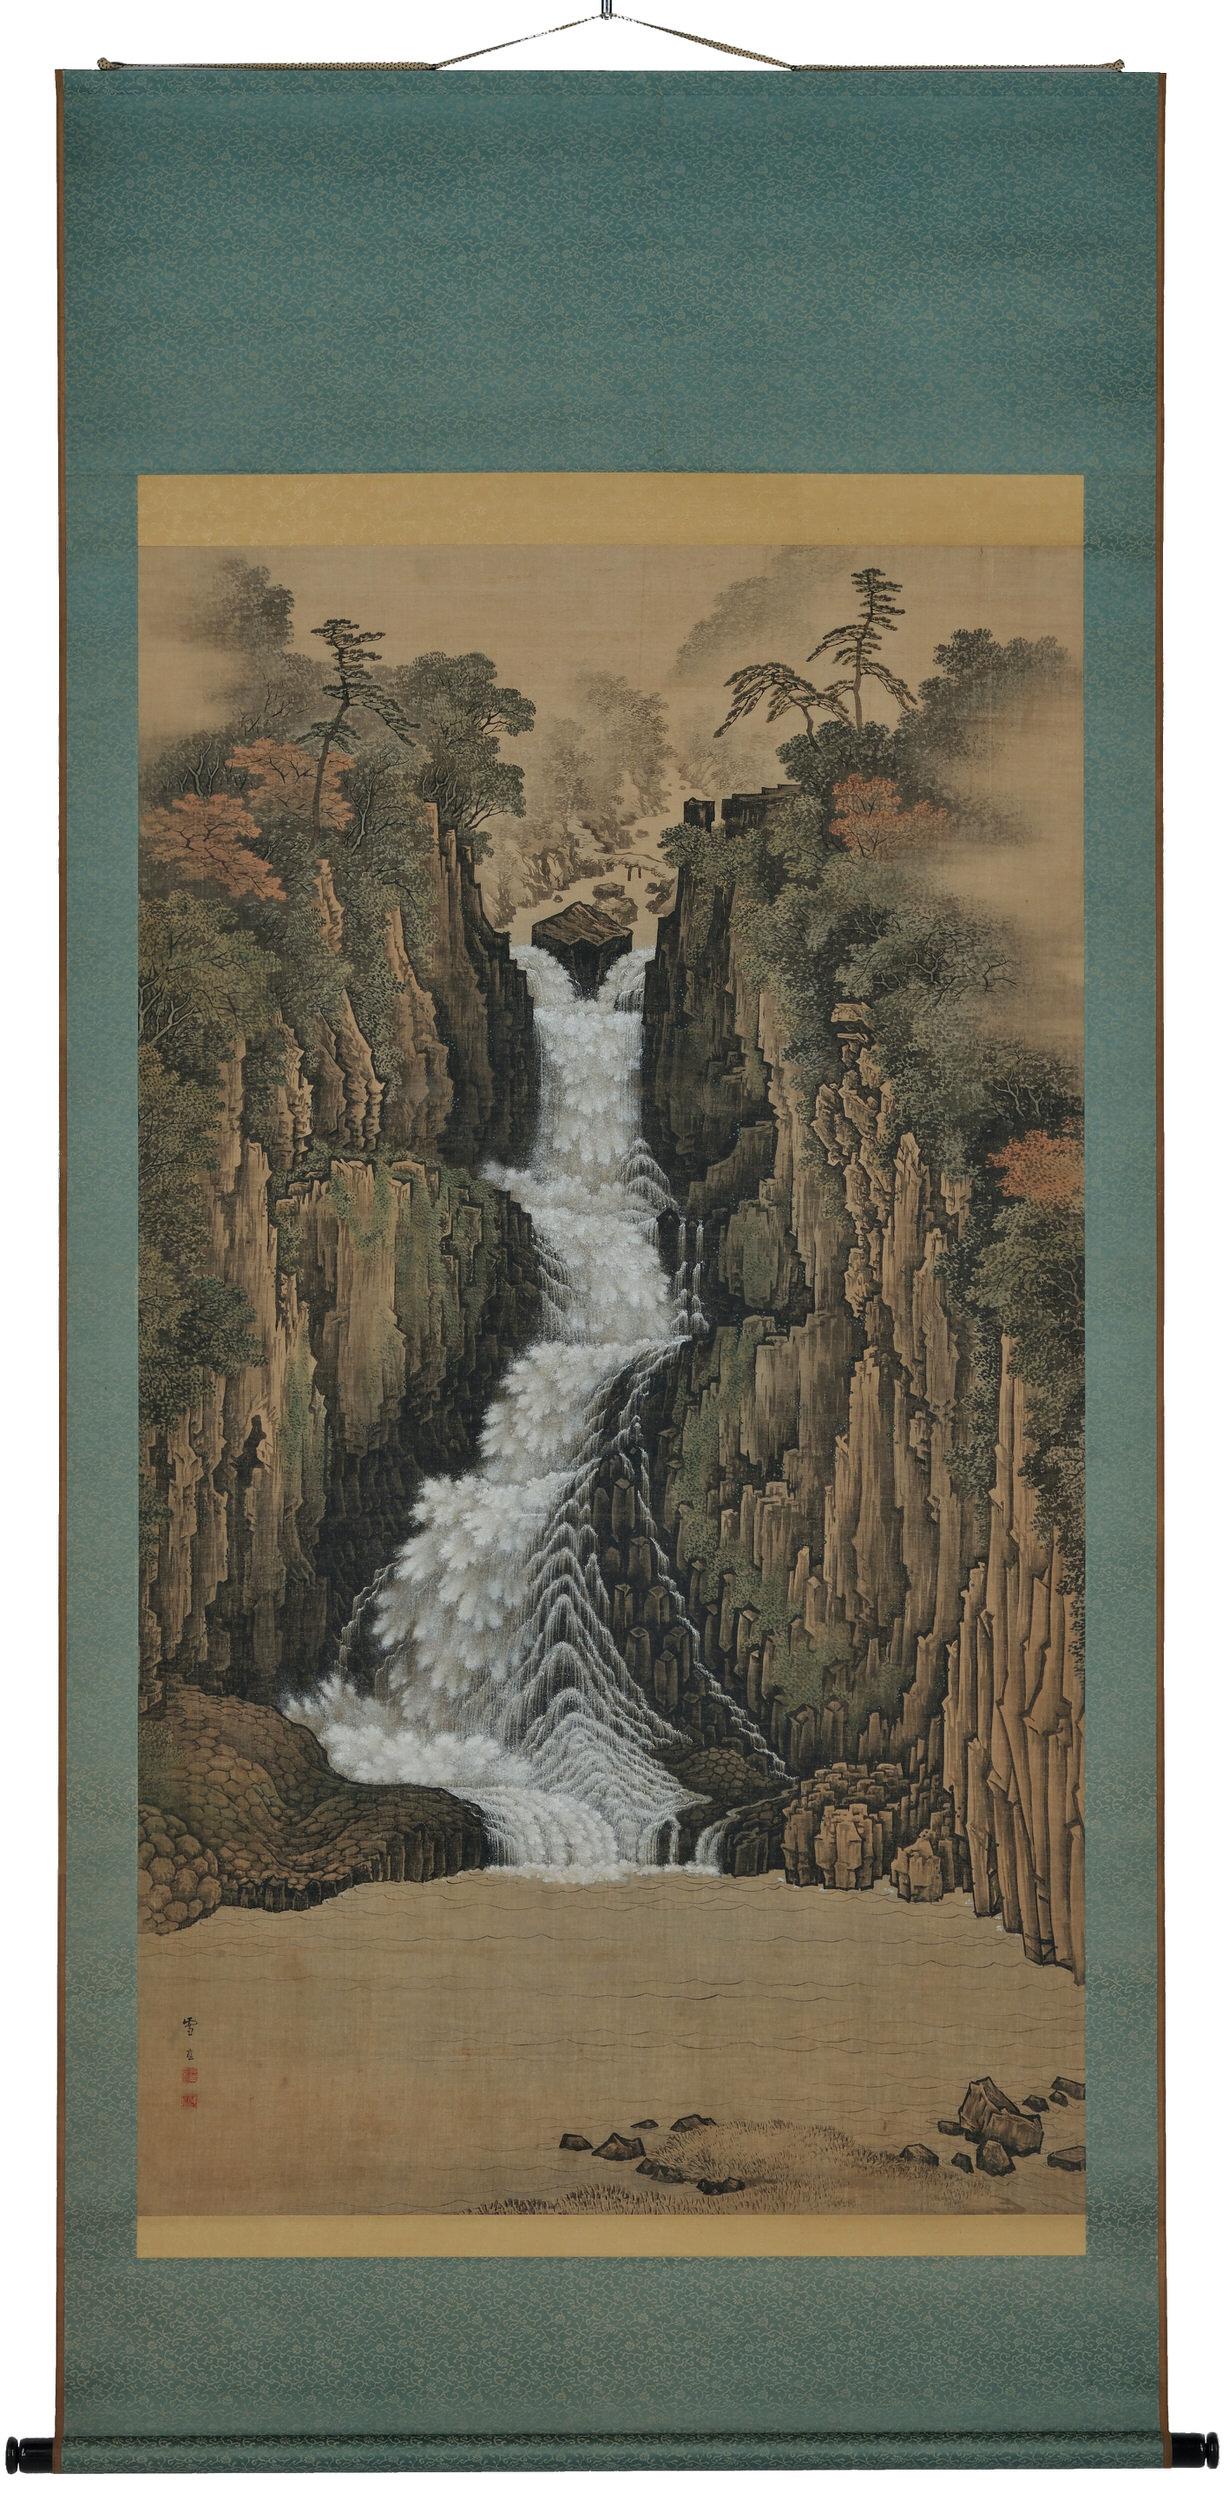 Nachi Waterfall

Sugitani Sessho (1827-1895),

circa 1885

Japanese scroll painting, ink and color on silk

Dimensions:

Scroll H 241 cm x W 111 cm

Image H 168 cm x W 95 cm

Nachi Falls is widely recognized as the tallest waterfall in